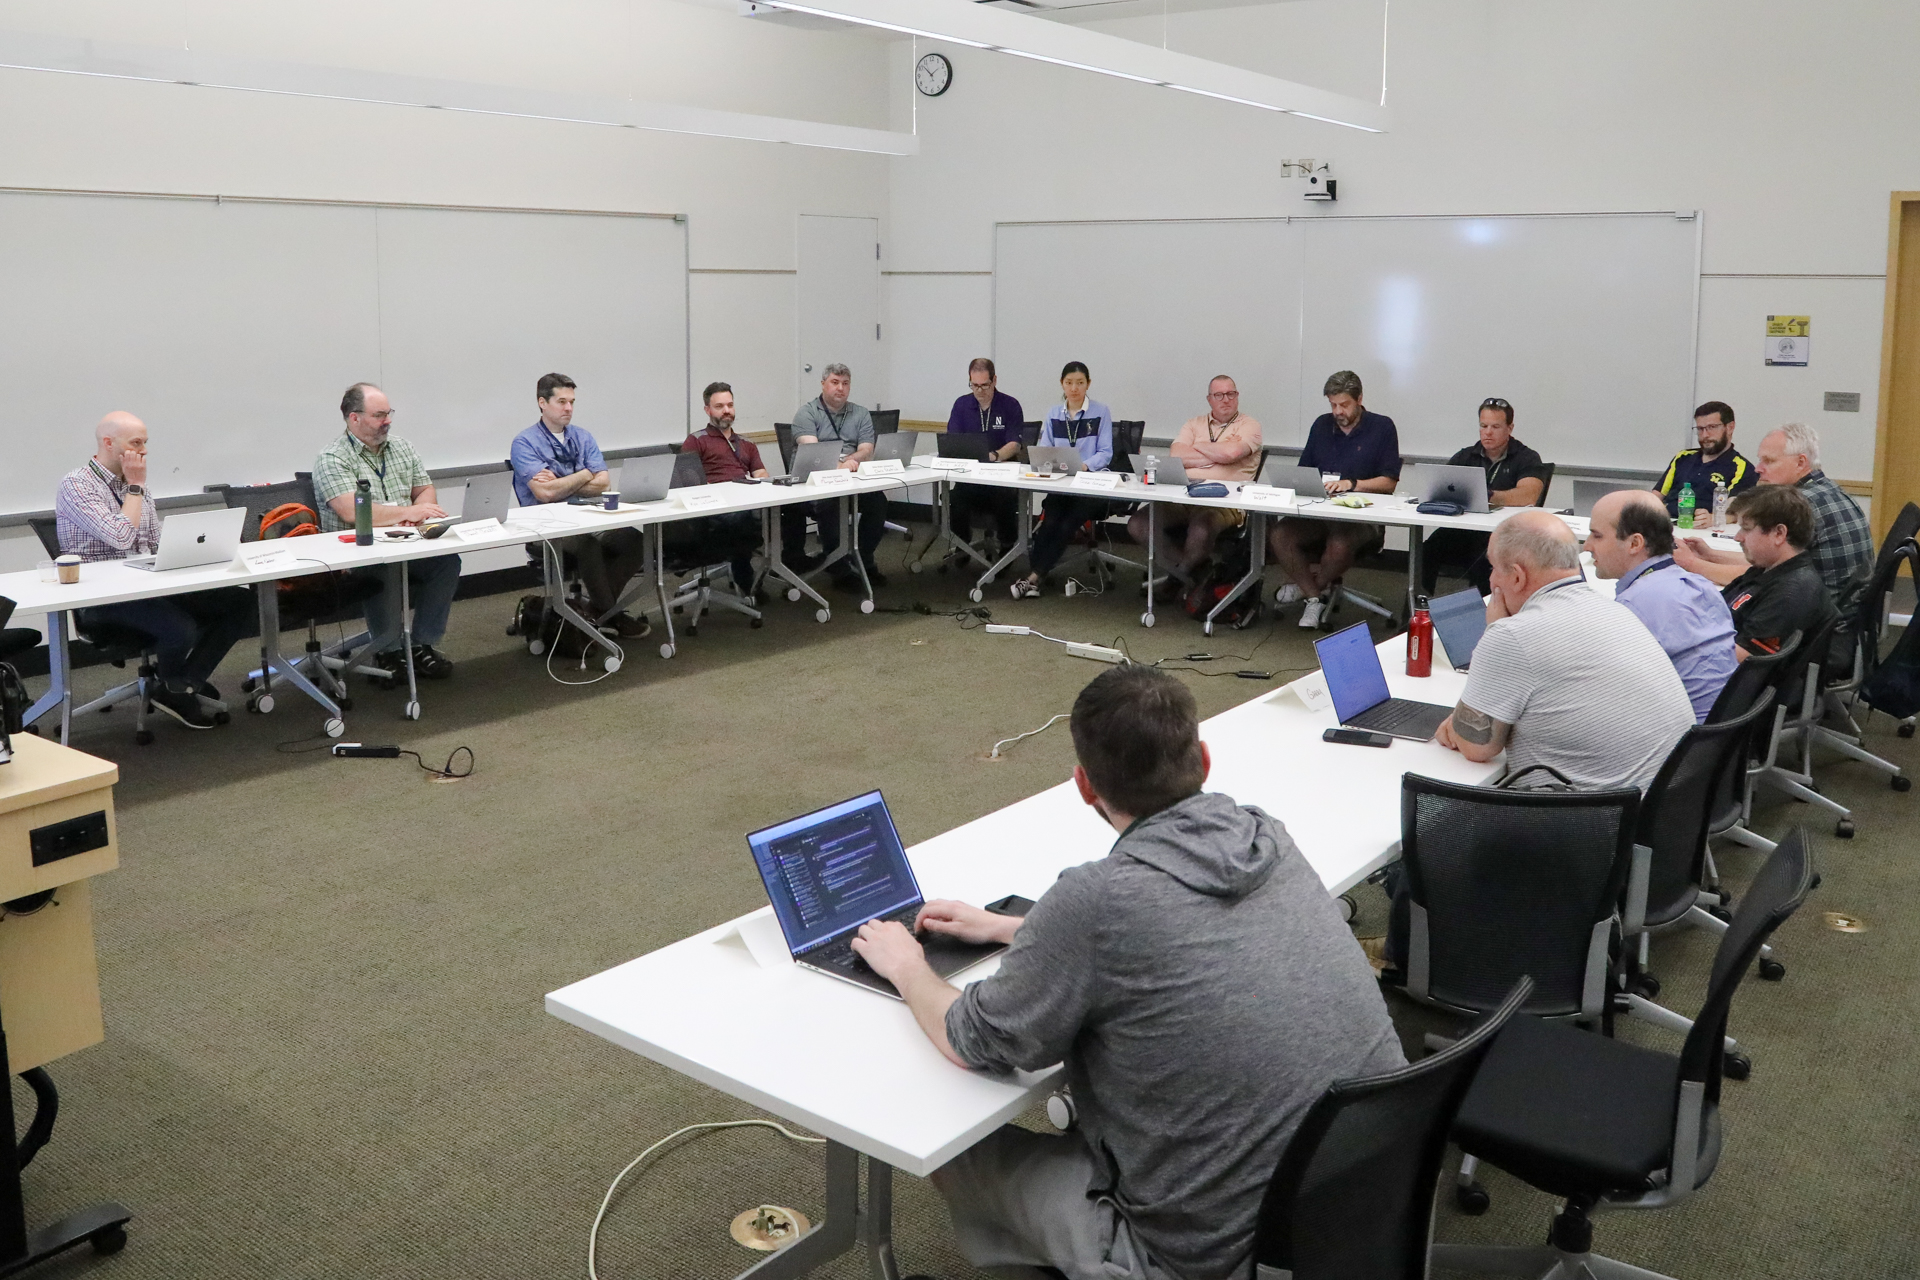 IT leaders in WiFi from Big Ten universities met in a hybrid classroom setting to discuss current initiatives at their institutions.